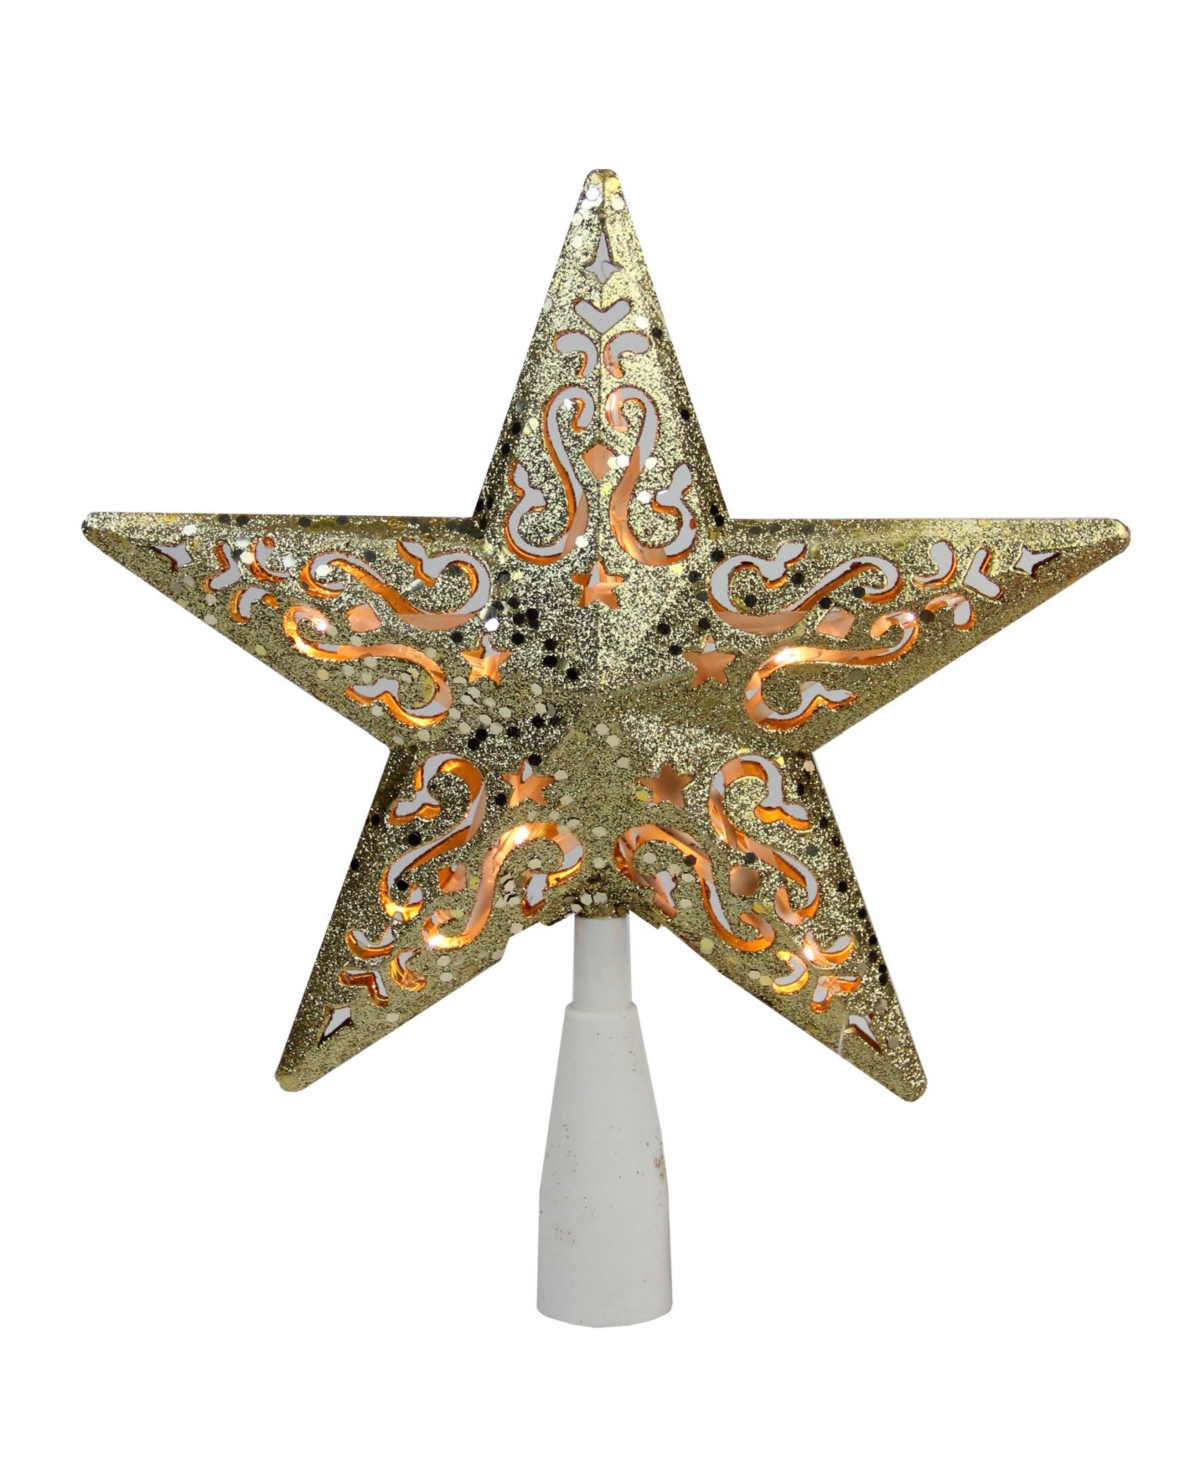 8.5" Gold Glitter Star Cut-Out Design Christmas Tree Topper - Clear Lights - Gold